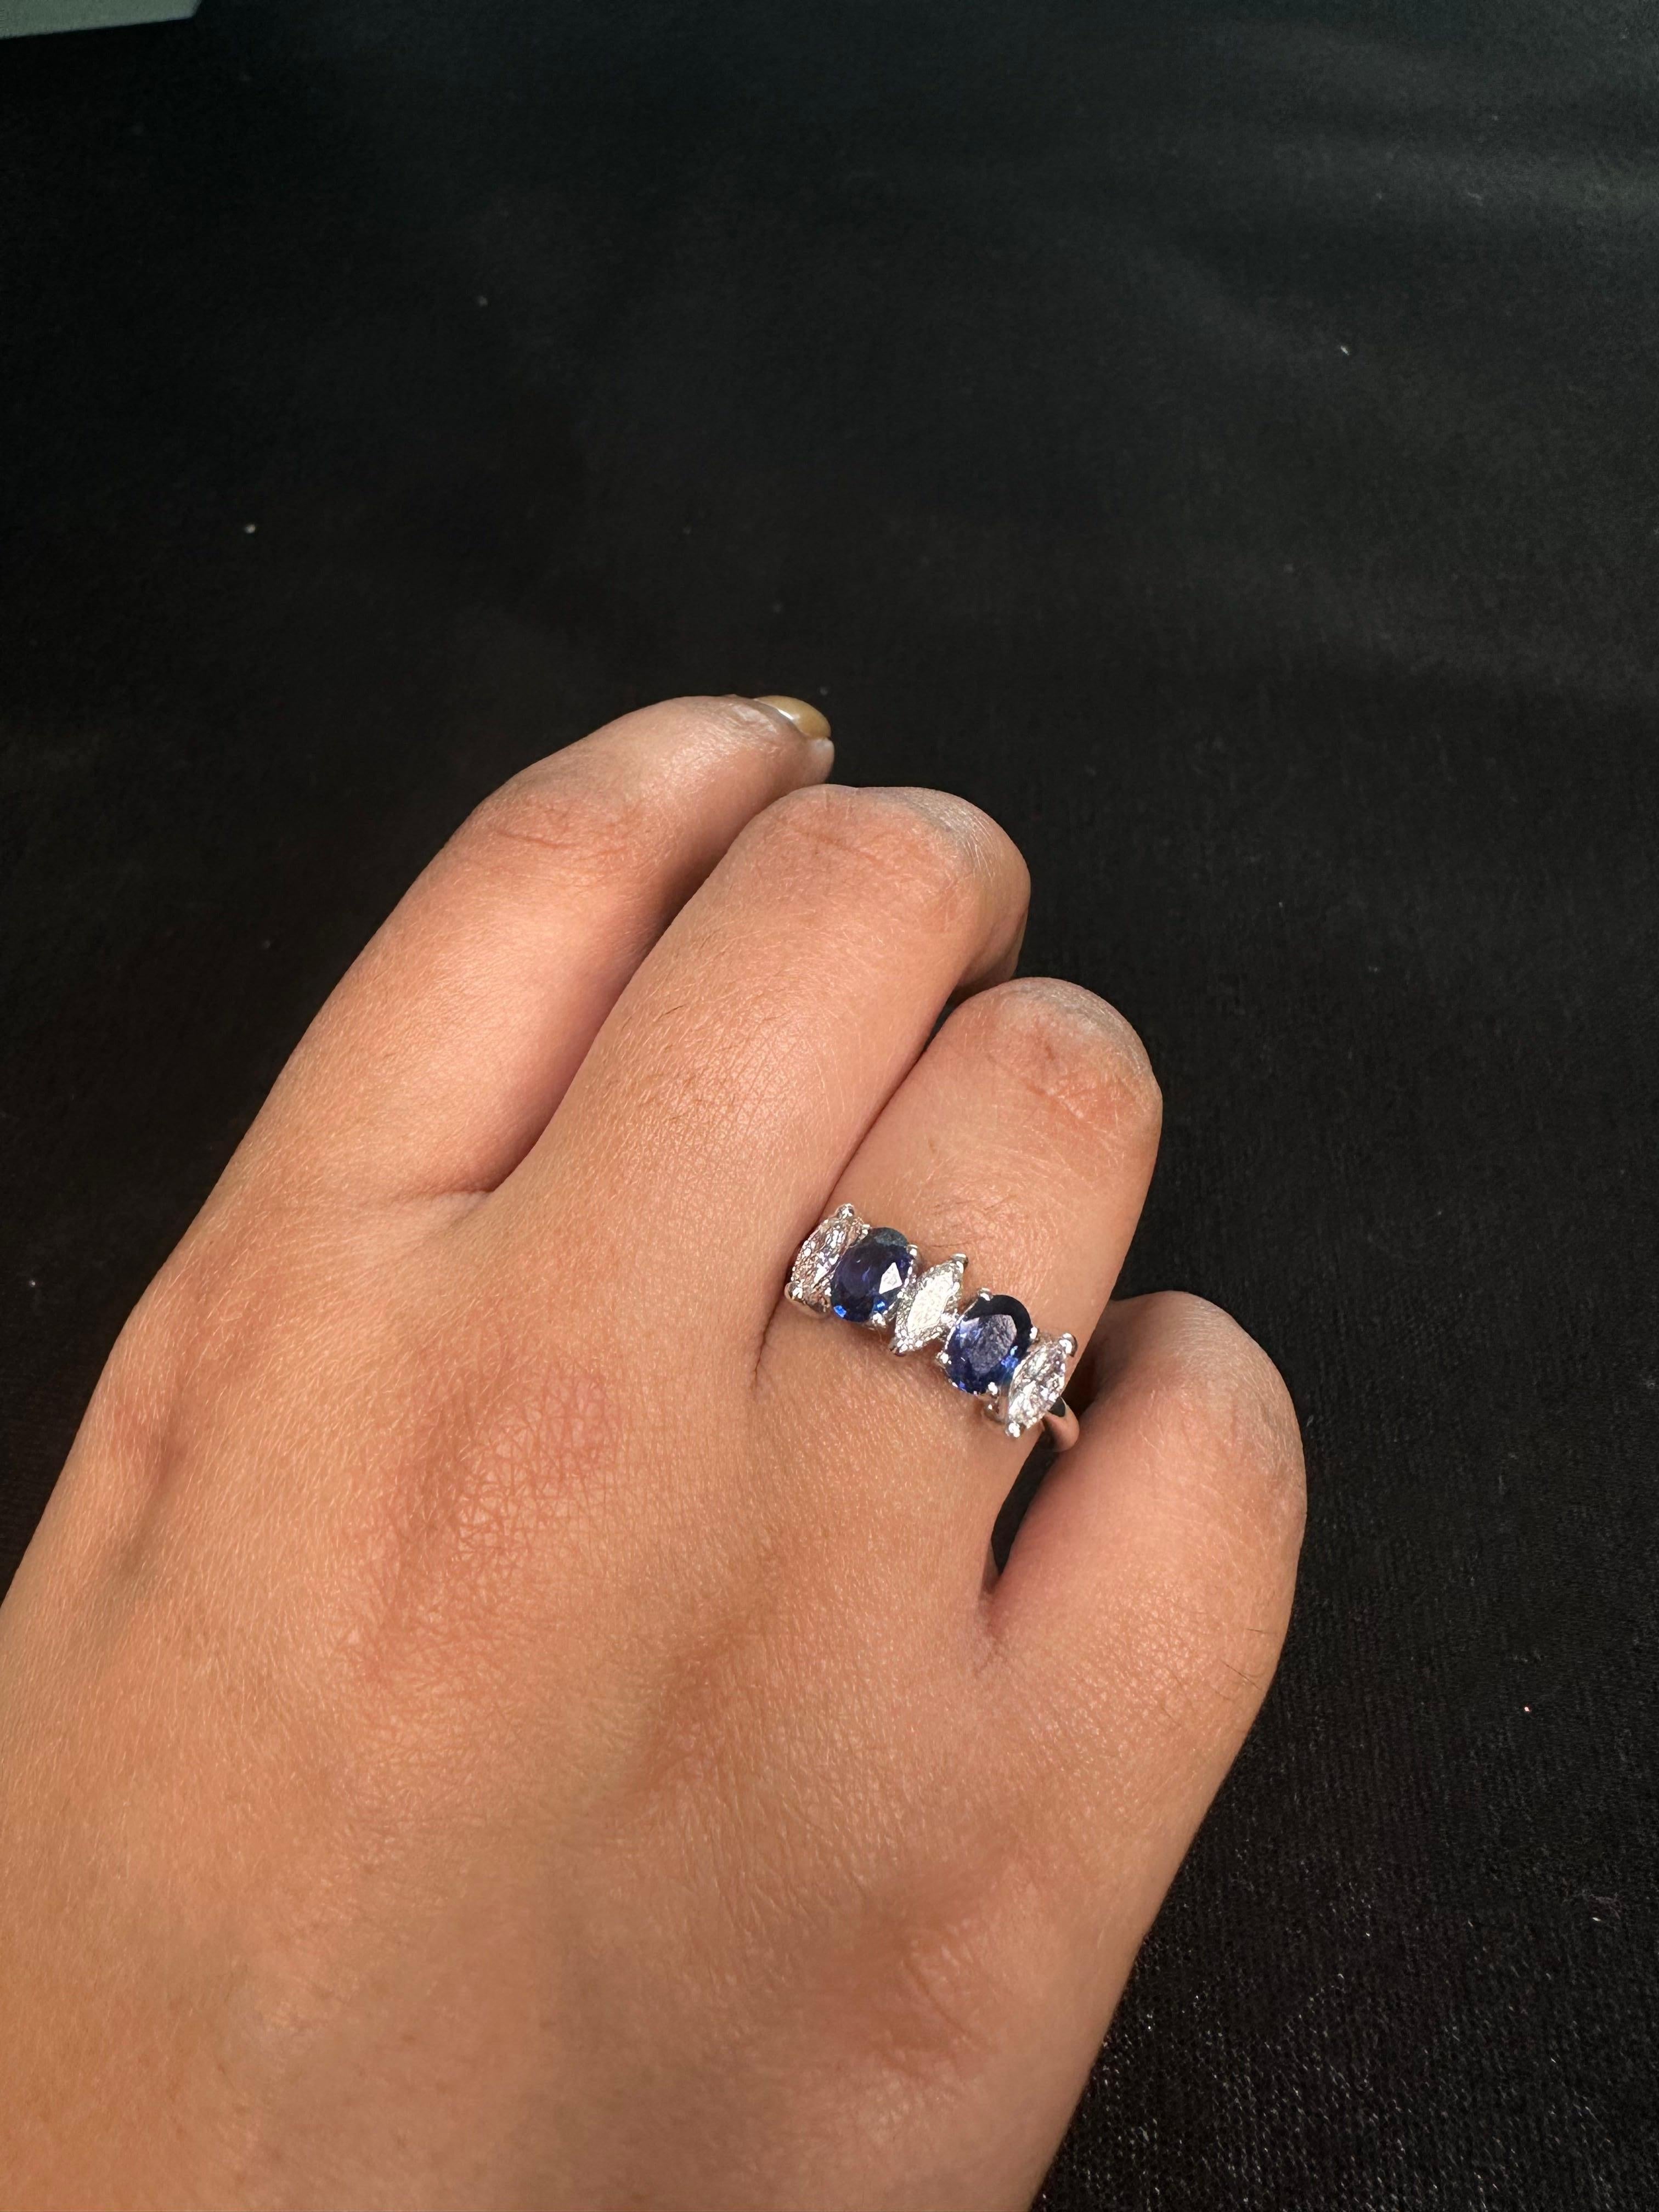 For Sale:  Stunning Diamond Blue Sapphire Engagement Ring For Her in Solid 18kt White Gold 5